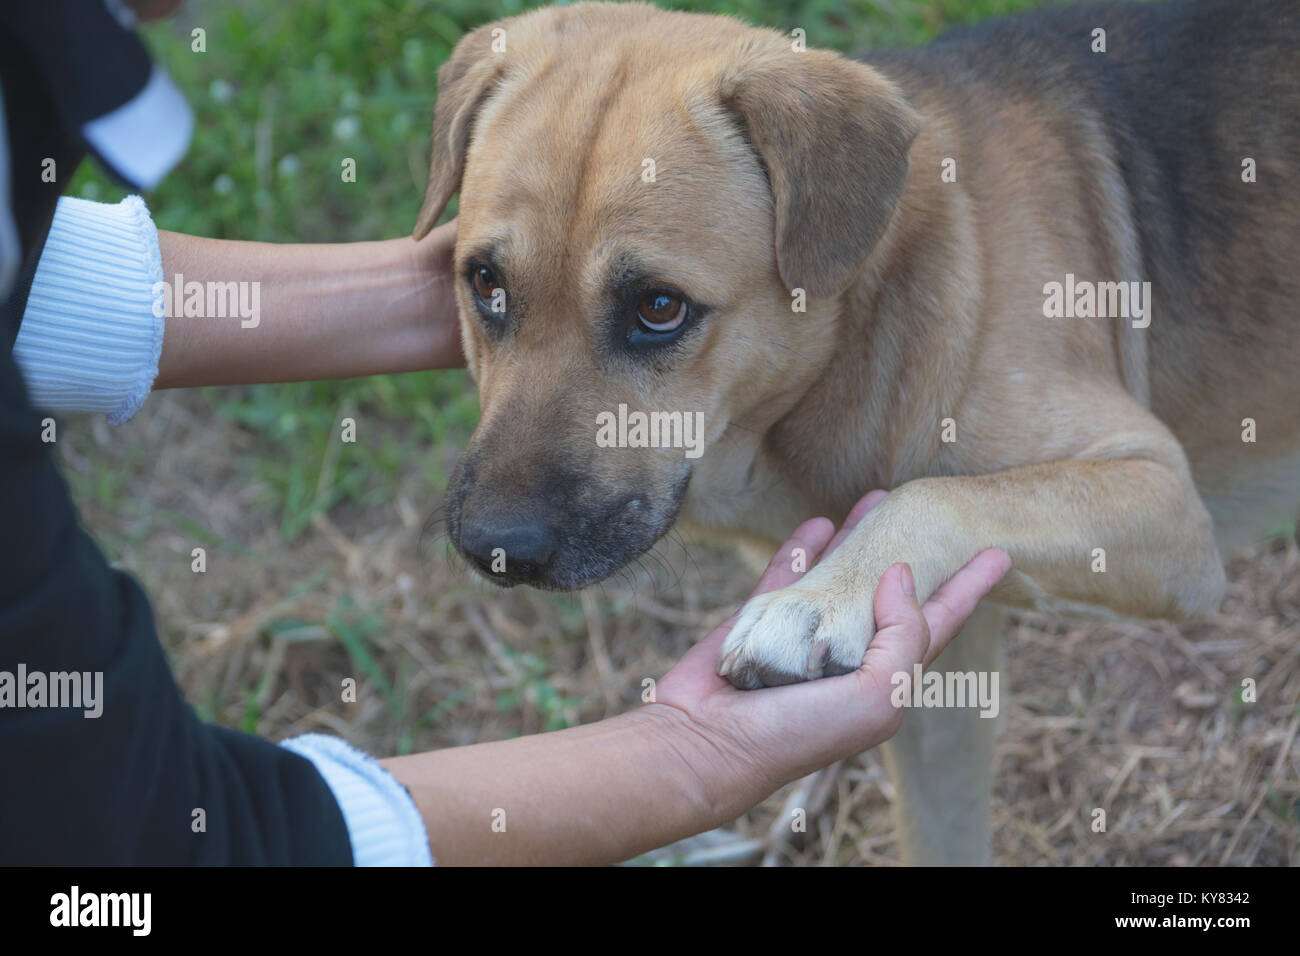 dogs shaking hand with human, friendship between human and dogs. Dog paw  and human hand shaking Stock Photo - Alamy